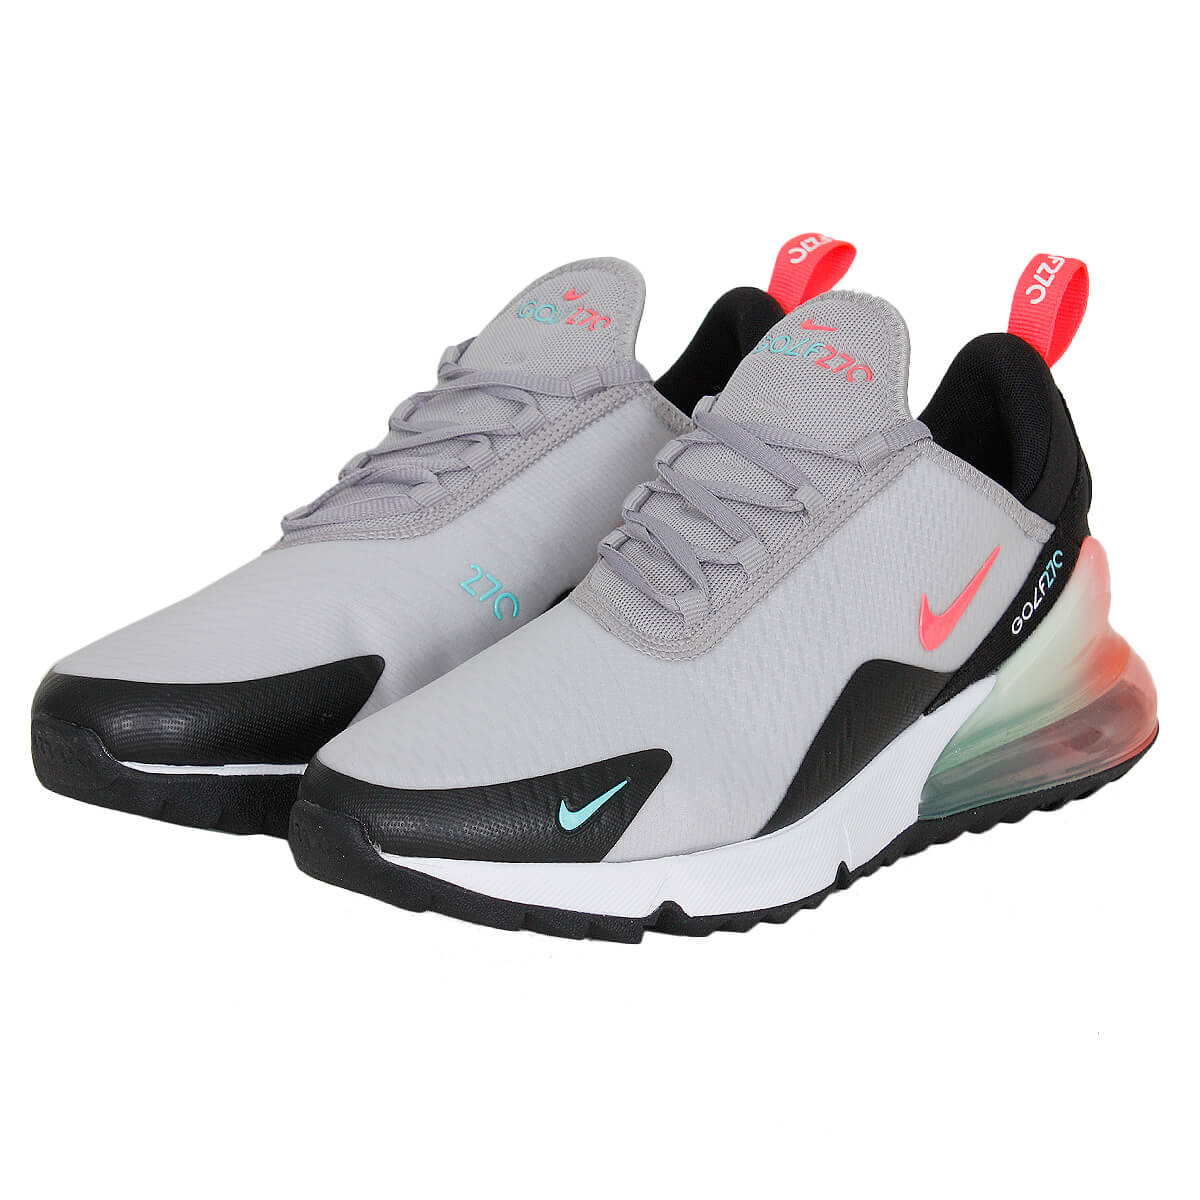 Nike Air Max 270 G Spikeless Waterproof Golf Shoes  - Atmosphere Grey/Hot Punch